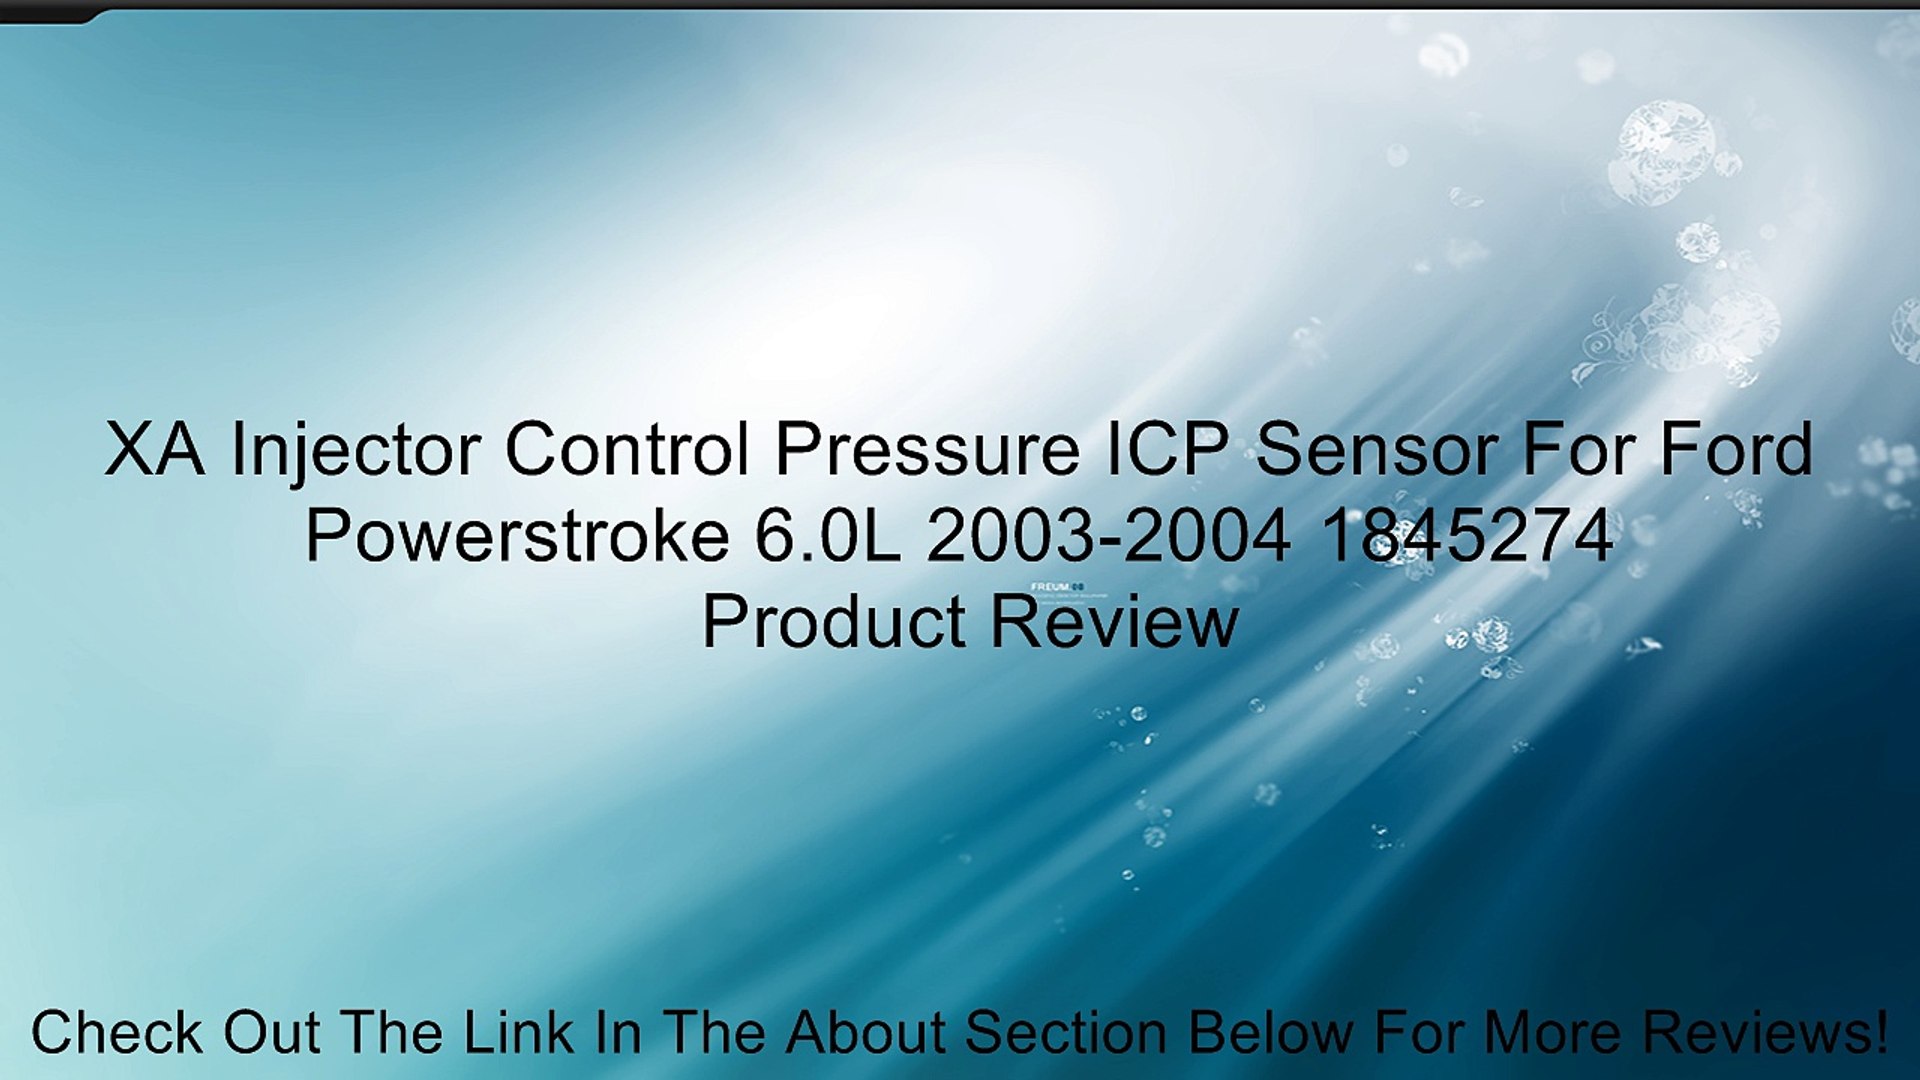 XA Injector Control Pressure ICP Sensor For Ford Powerstroke 6.0L 2003-2004 1845274 Review